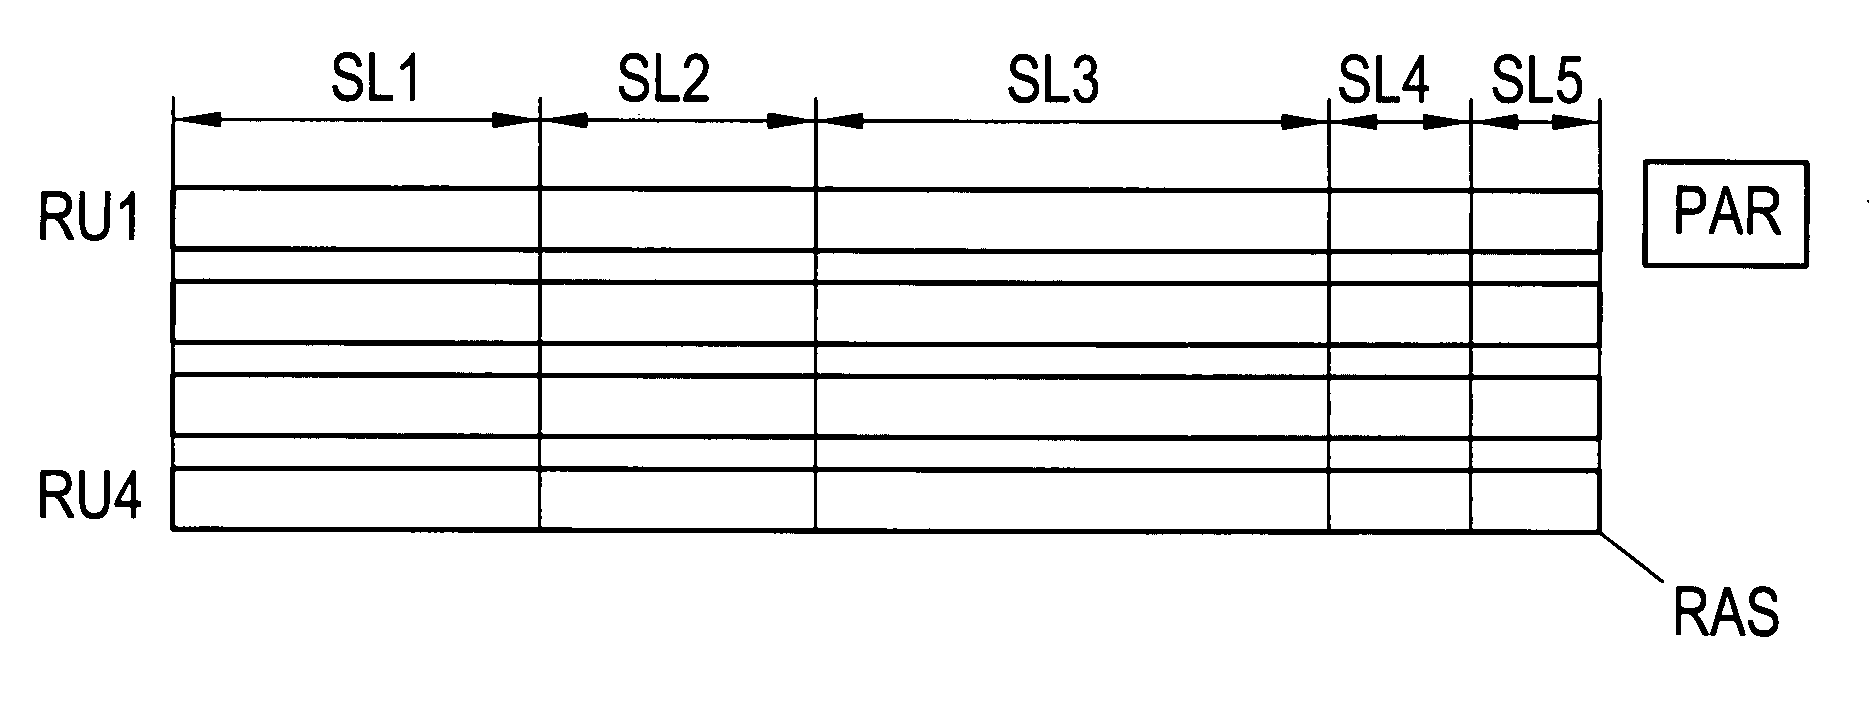 Method for establishing communication plans for a divided real-time computer system